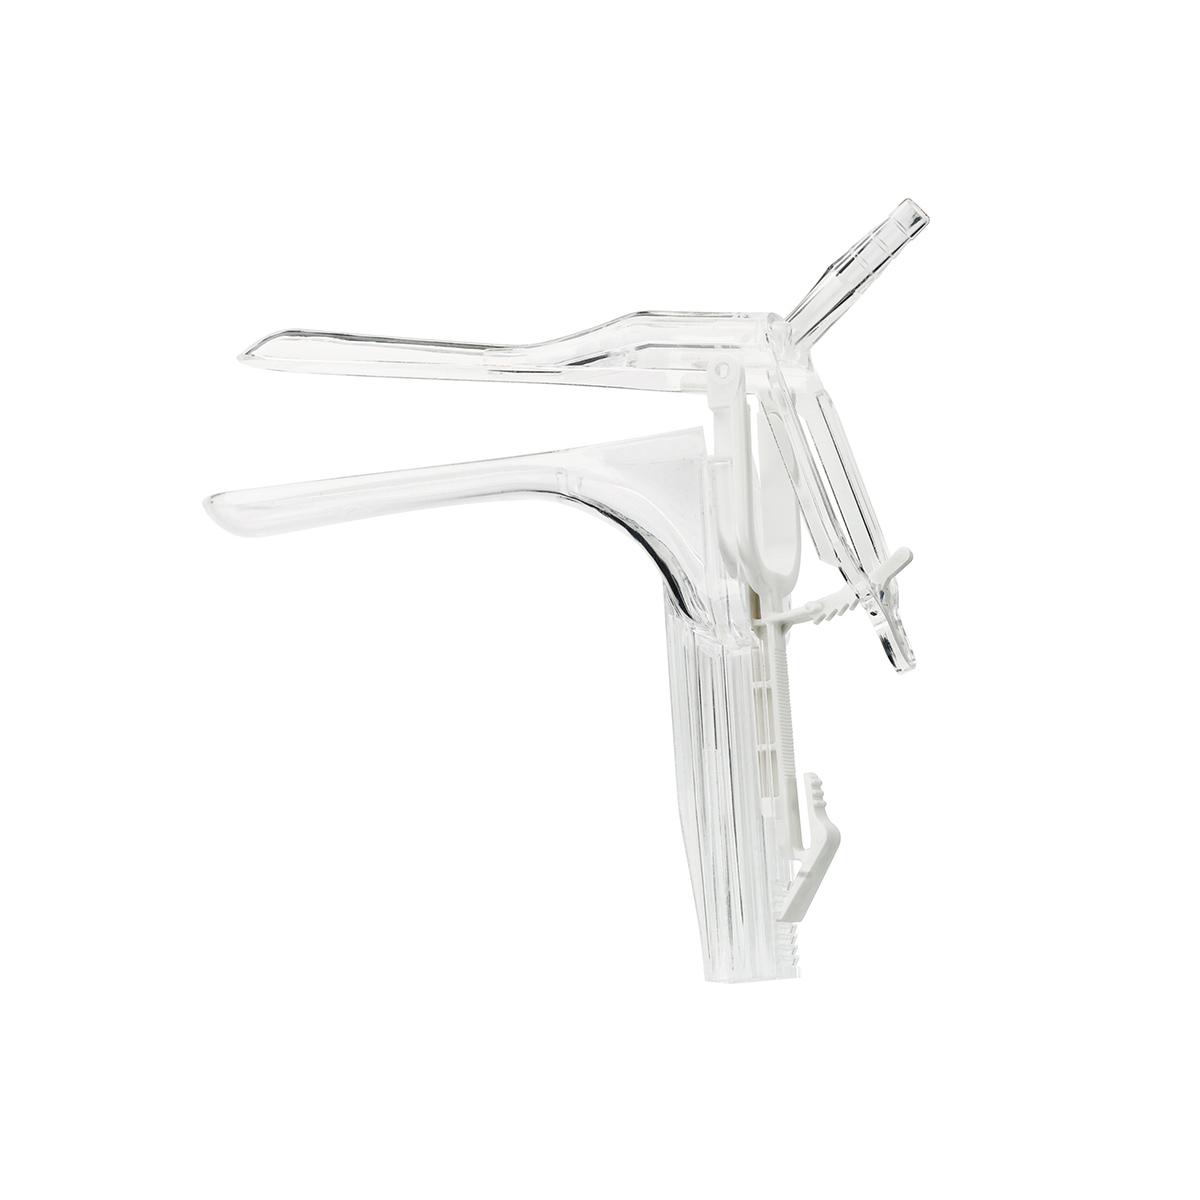 KleenSpec Disposable Vaginal Speculum with Smoke Tube, side view